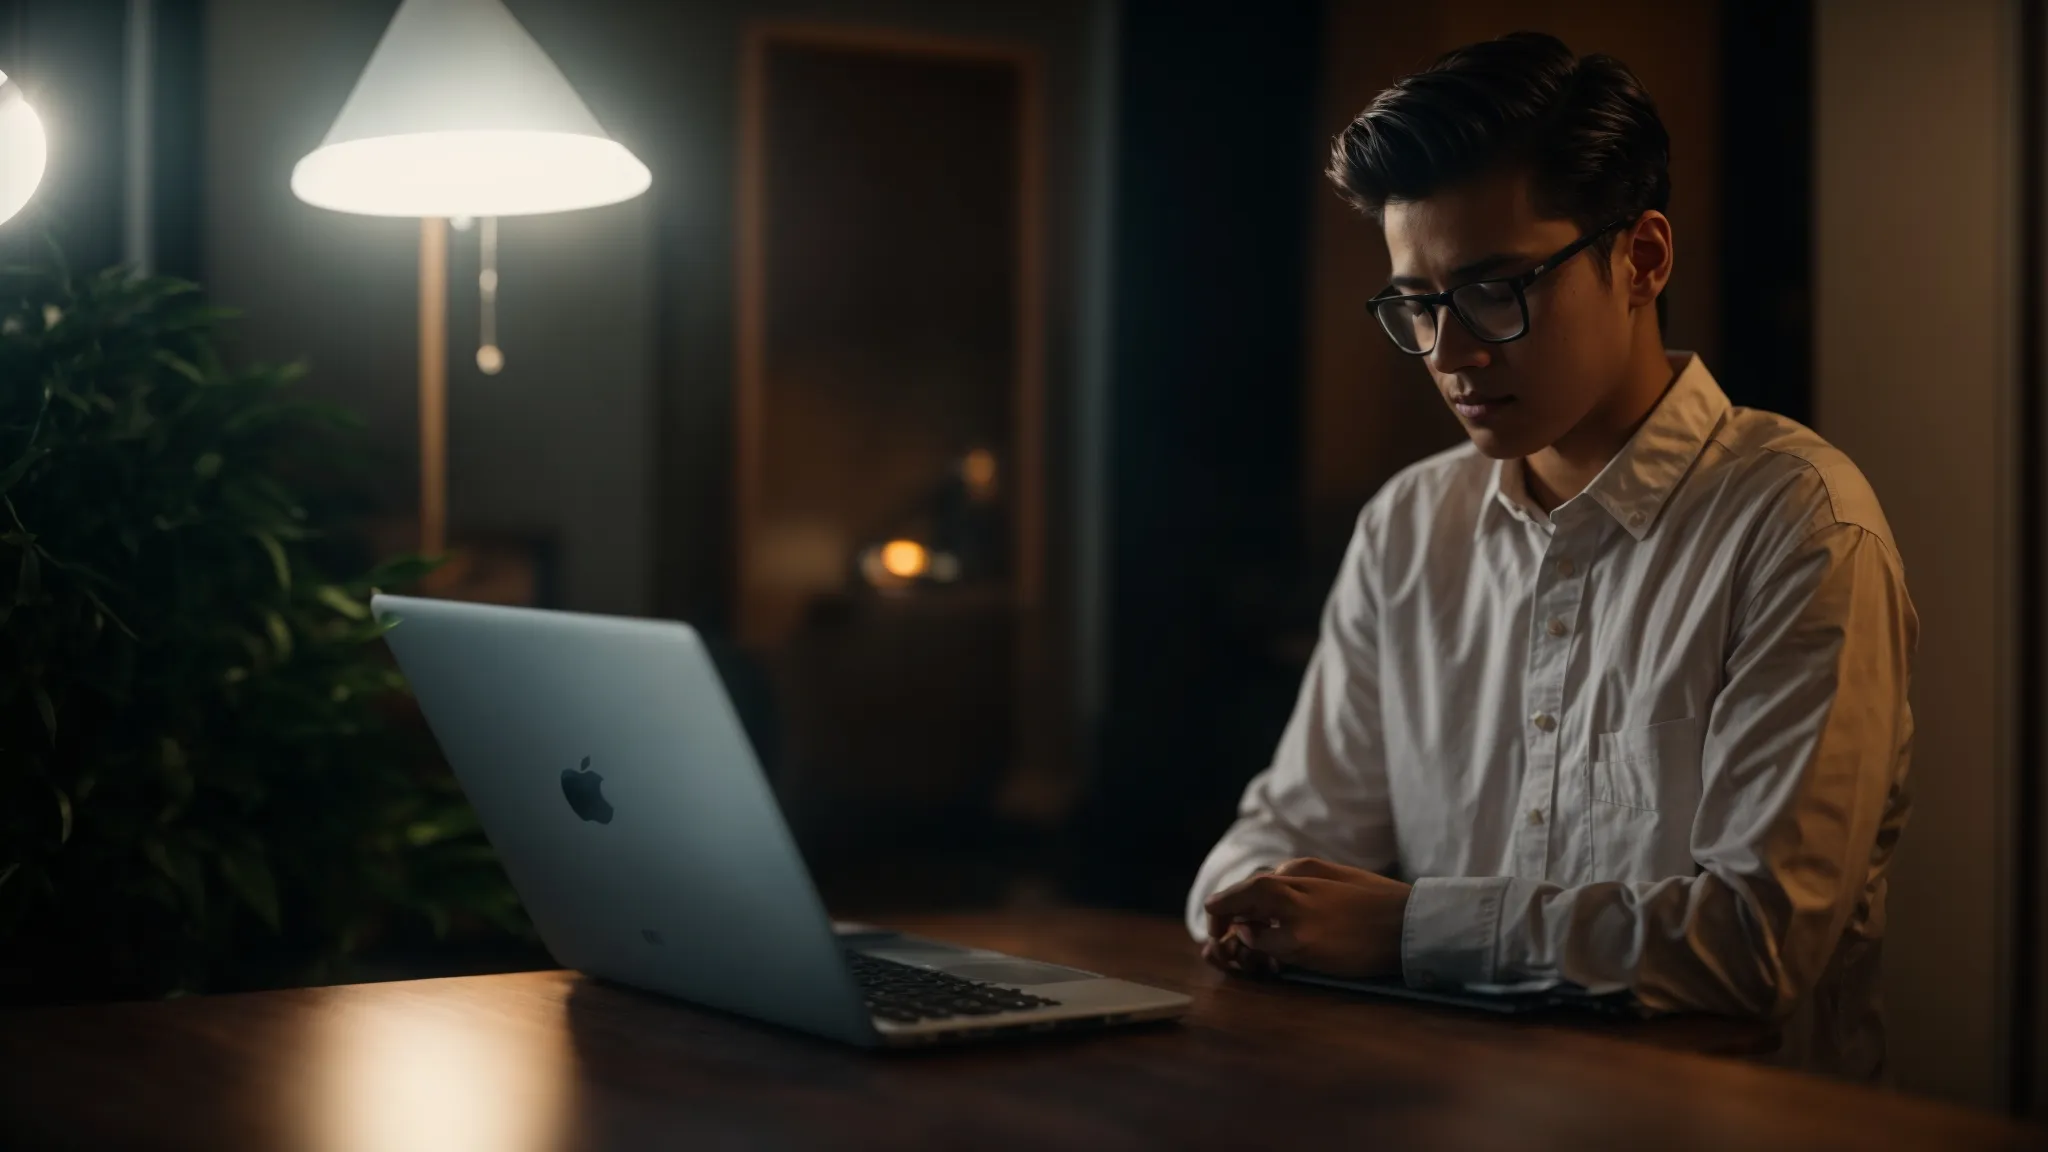 a person staring thoughtfully at a brightly lit laptop screen in a dimly lit room.